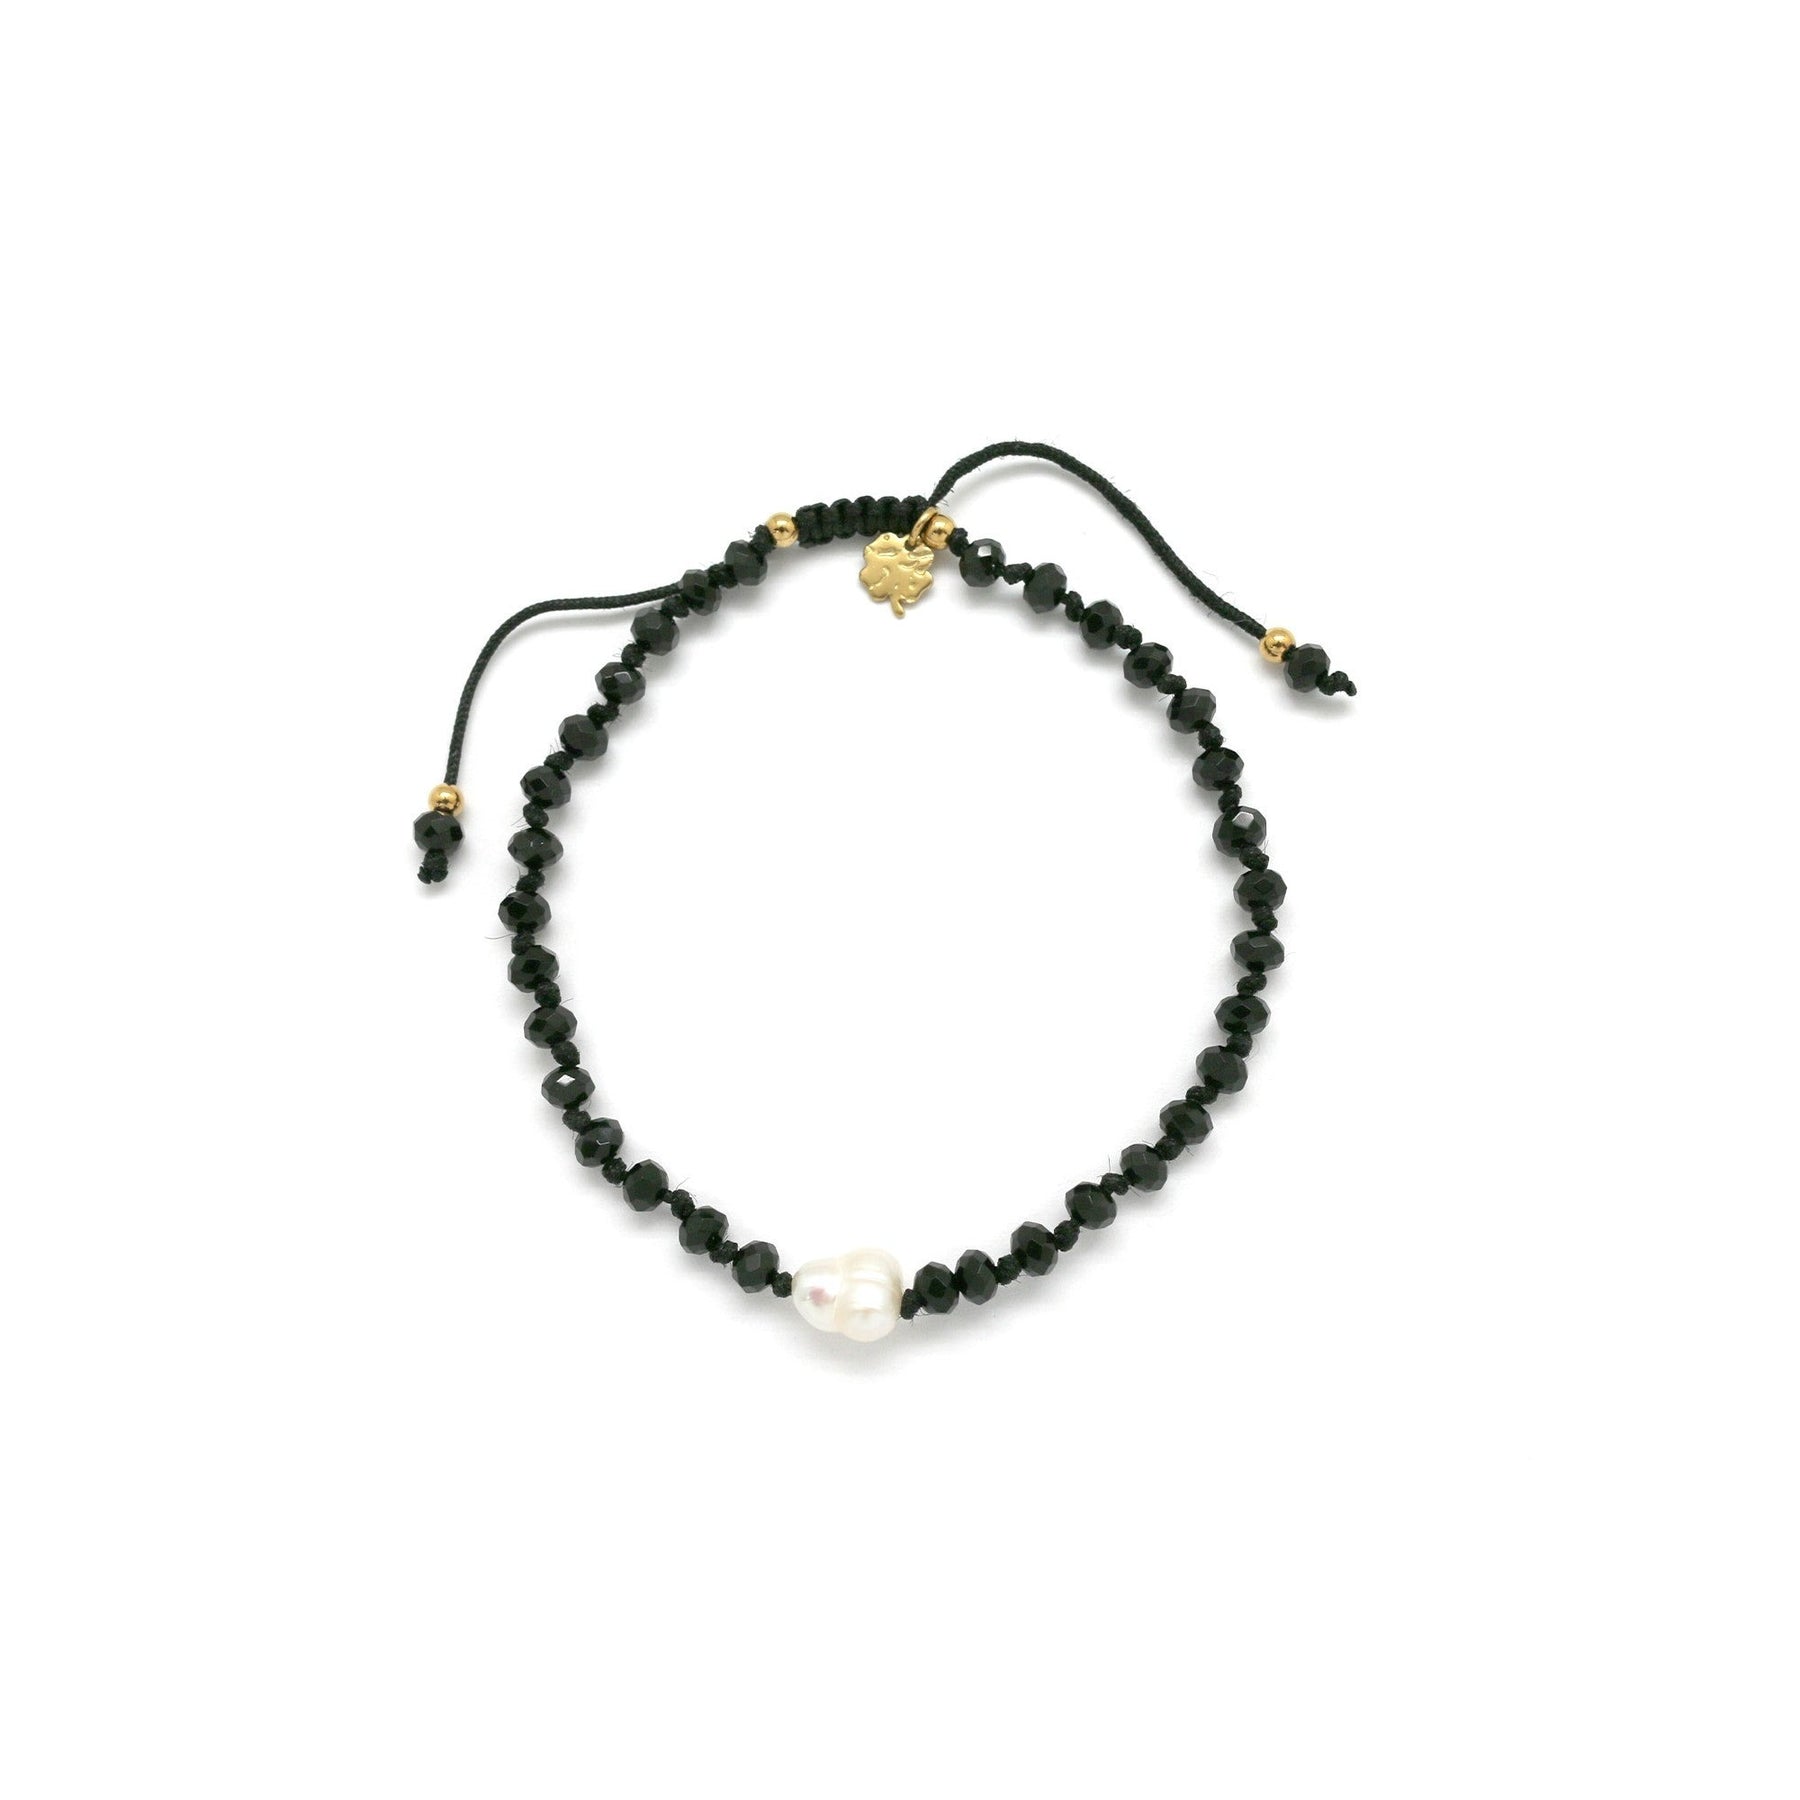 Adjustable onyx bracelet with water pearl